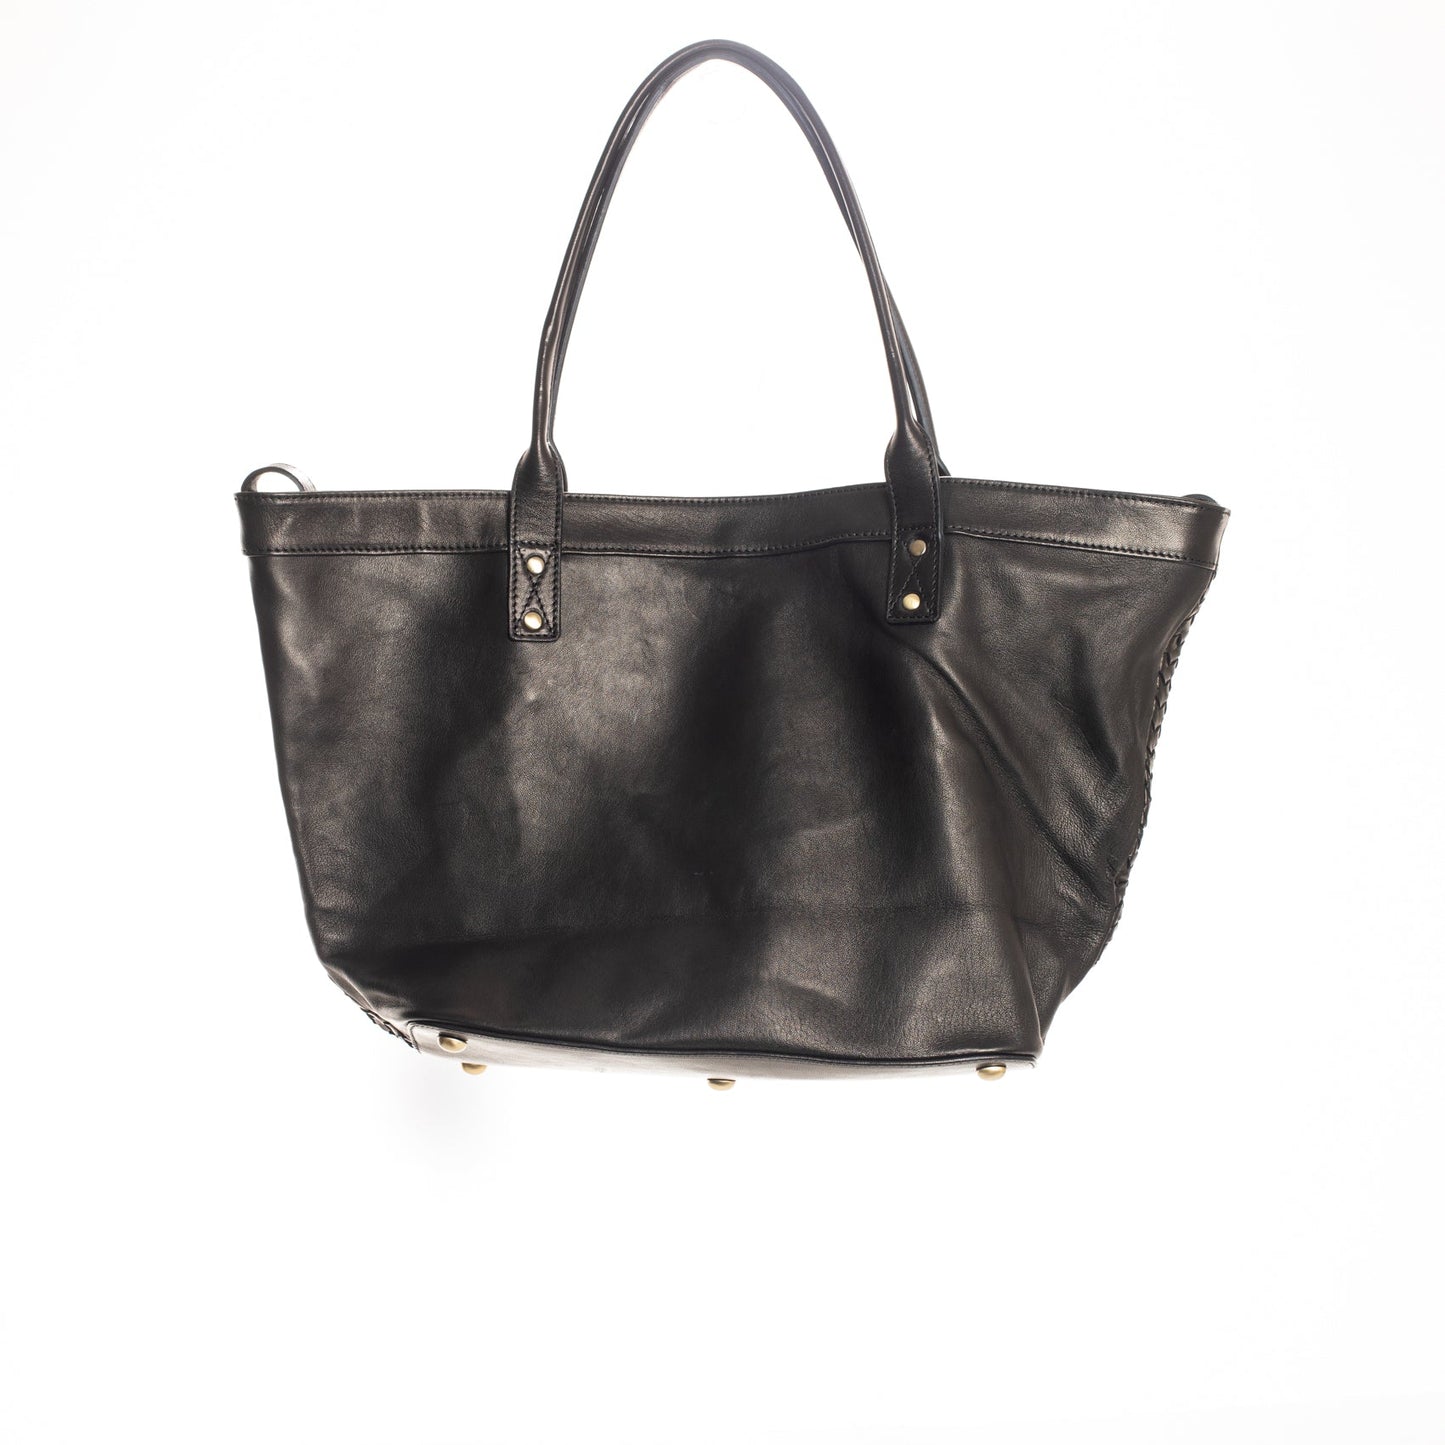 CONVERTIBLE TOTE BAG - MOROCCO WOVEN COLLECTION - BLACK LEATHER